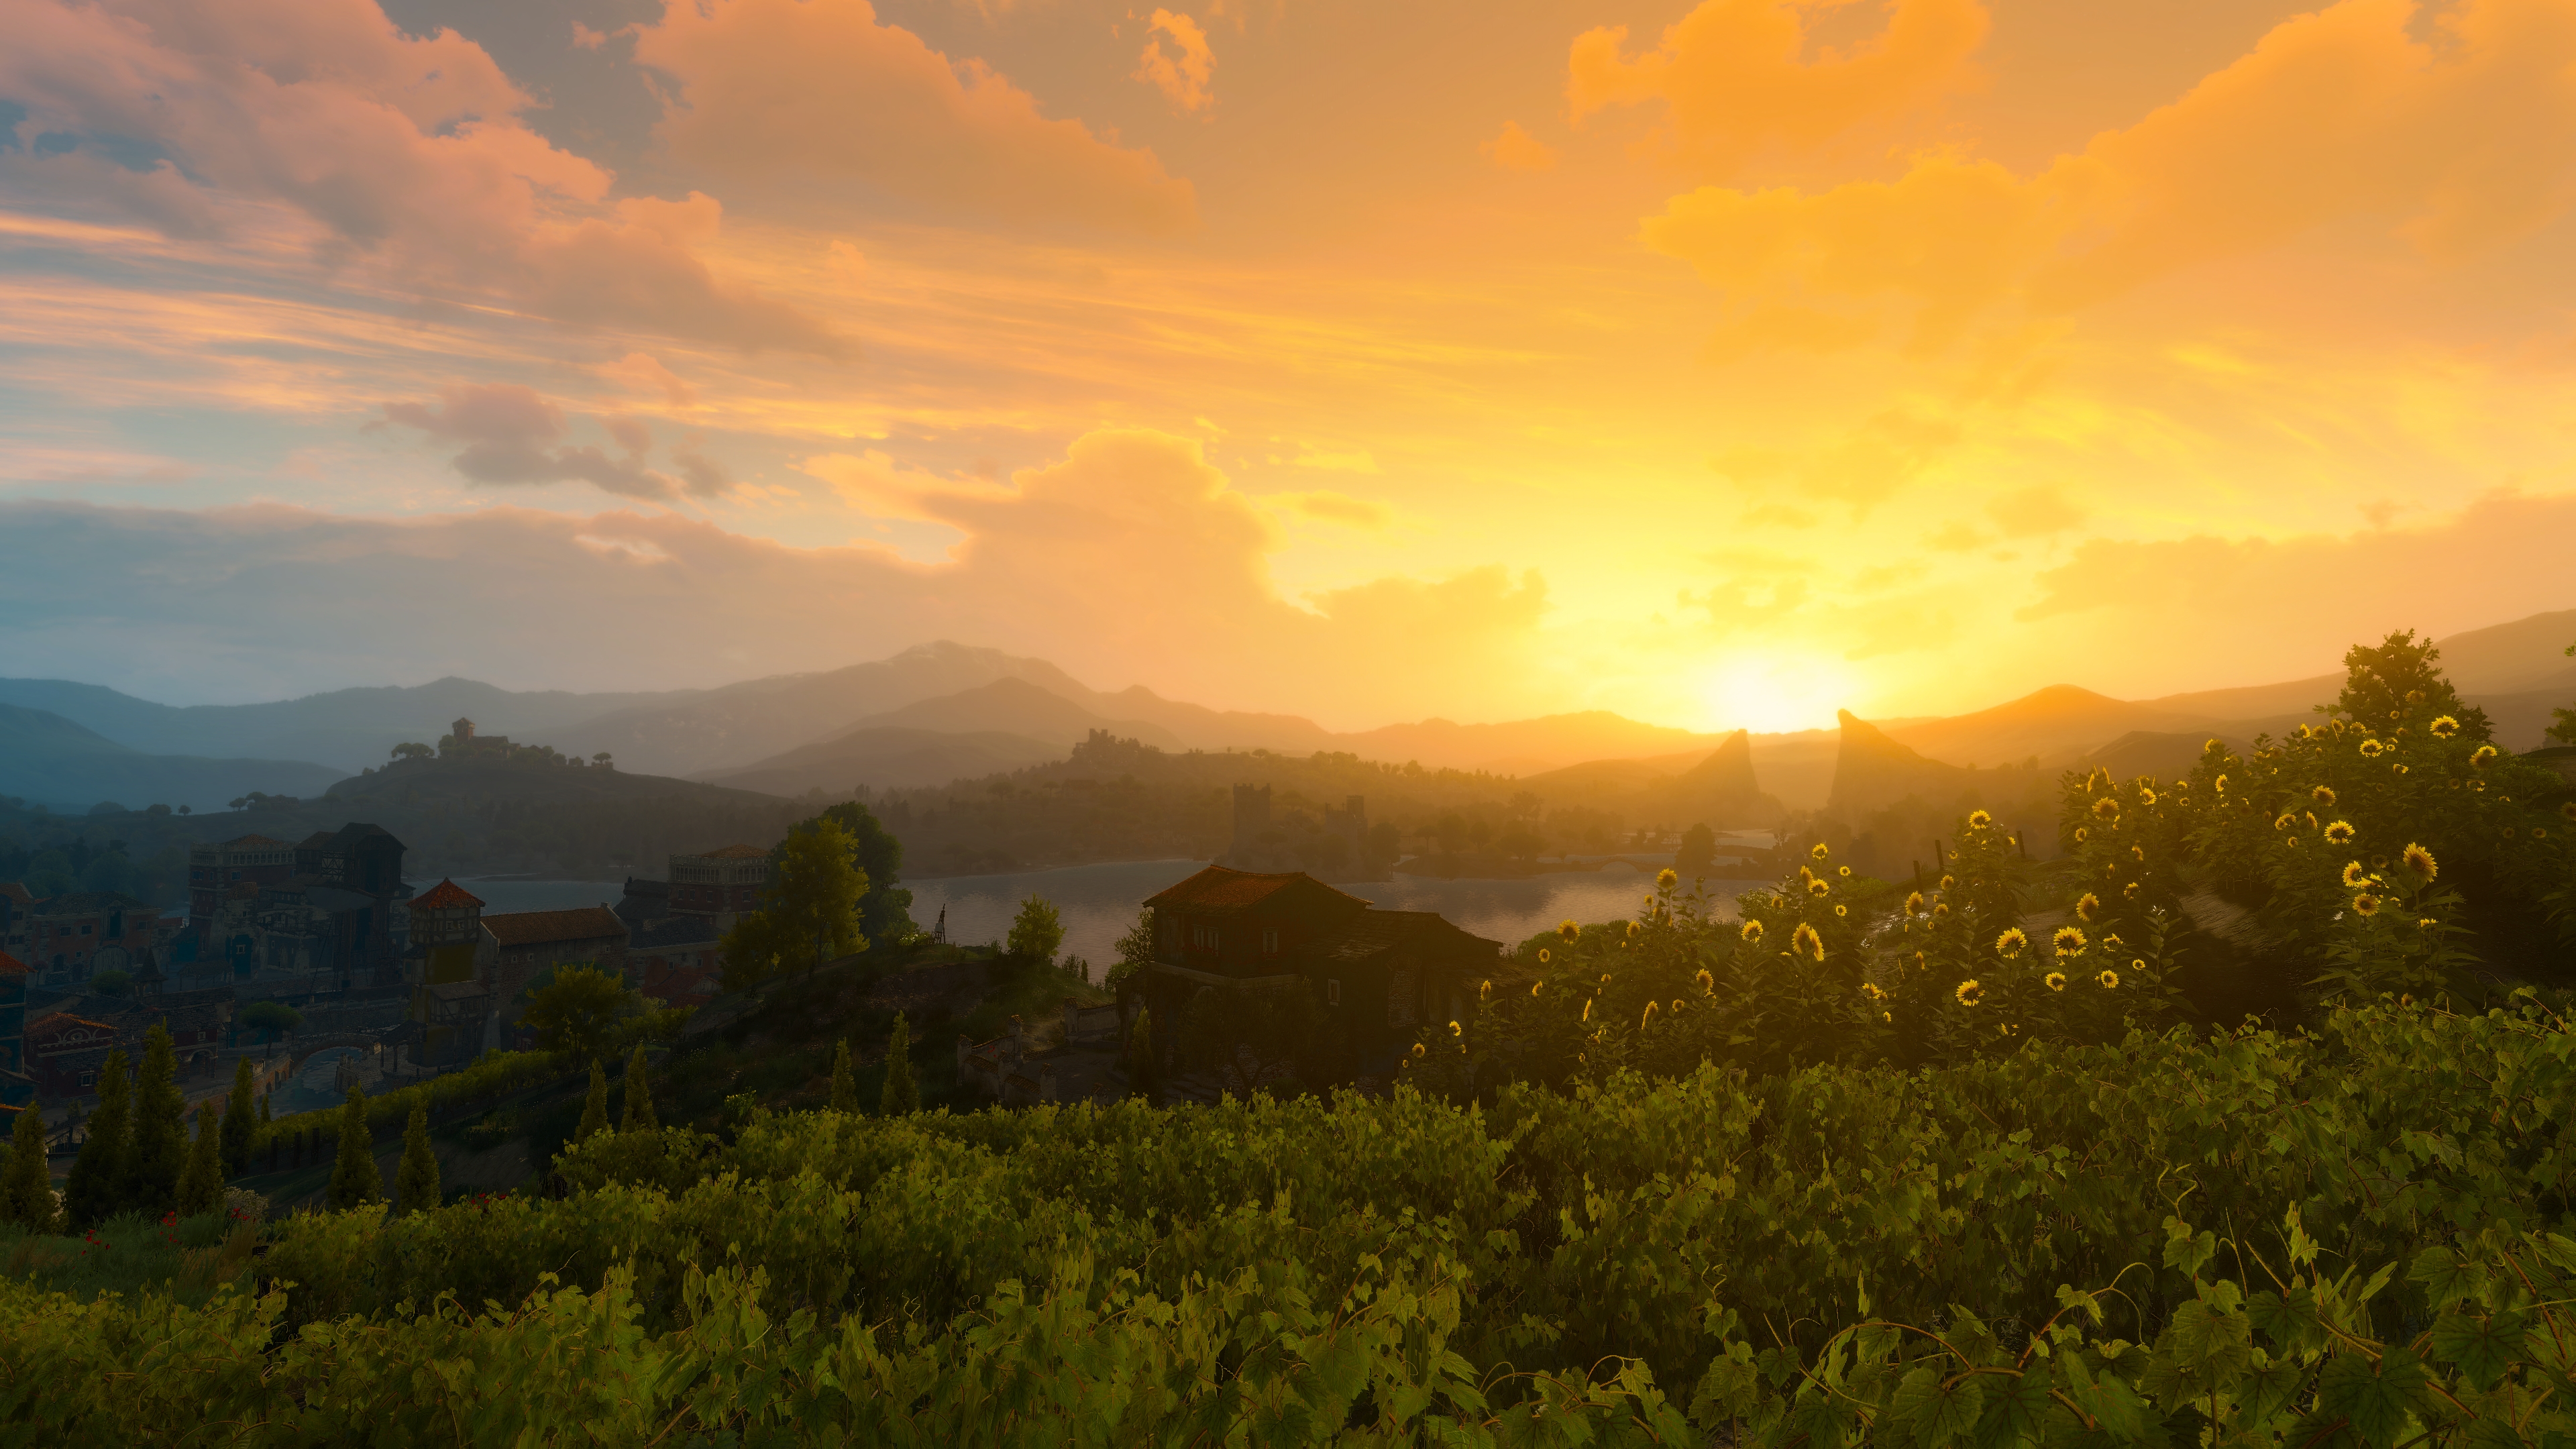 General 3840x2160 The Witcher 3: Wild Hunt screen shot PC gaming The Witcher video games video game art digital art sunset sunset glow grass trees water sky clouds Sun sunlight sunflowers mountains nature CGI landscape